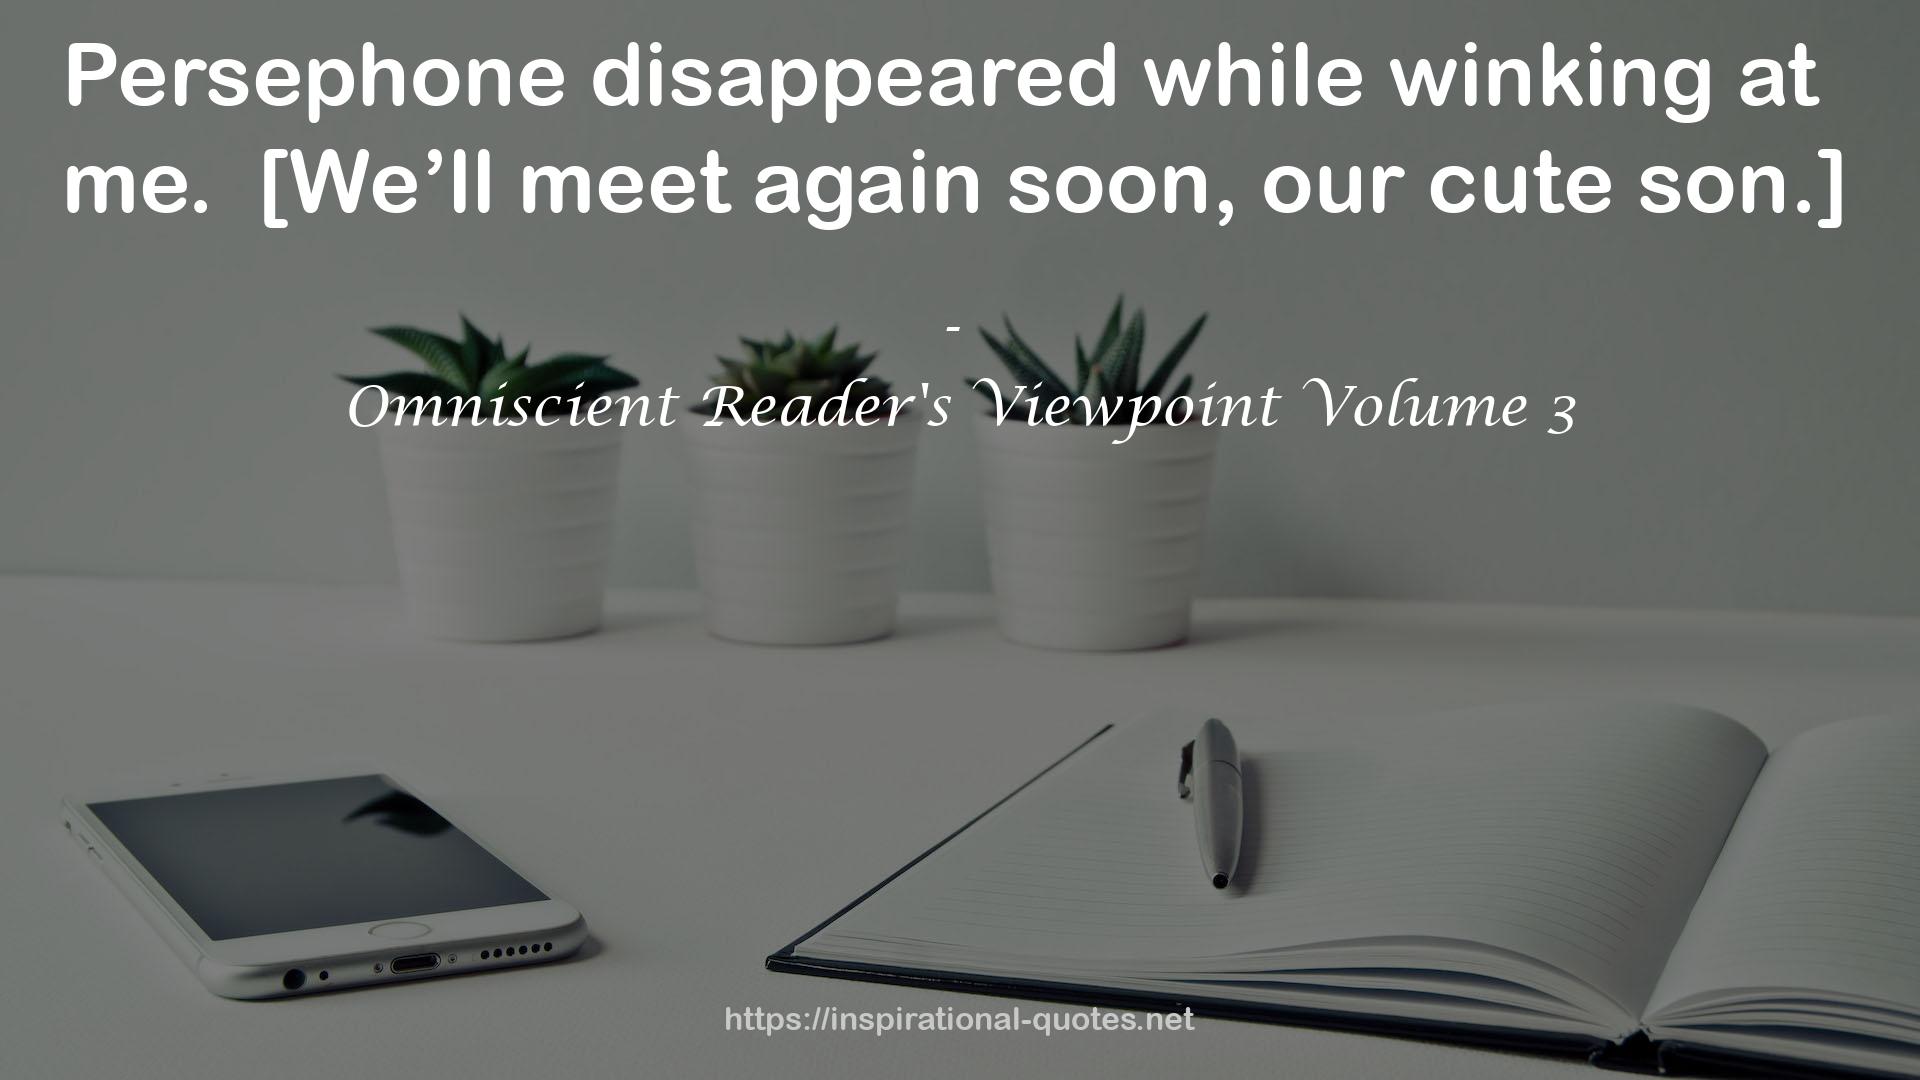 Omniscient Reader's Viewpoint Volume 3 QUOTES